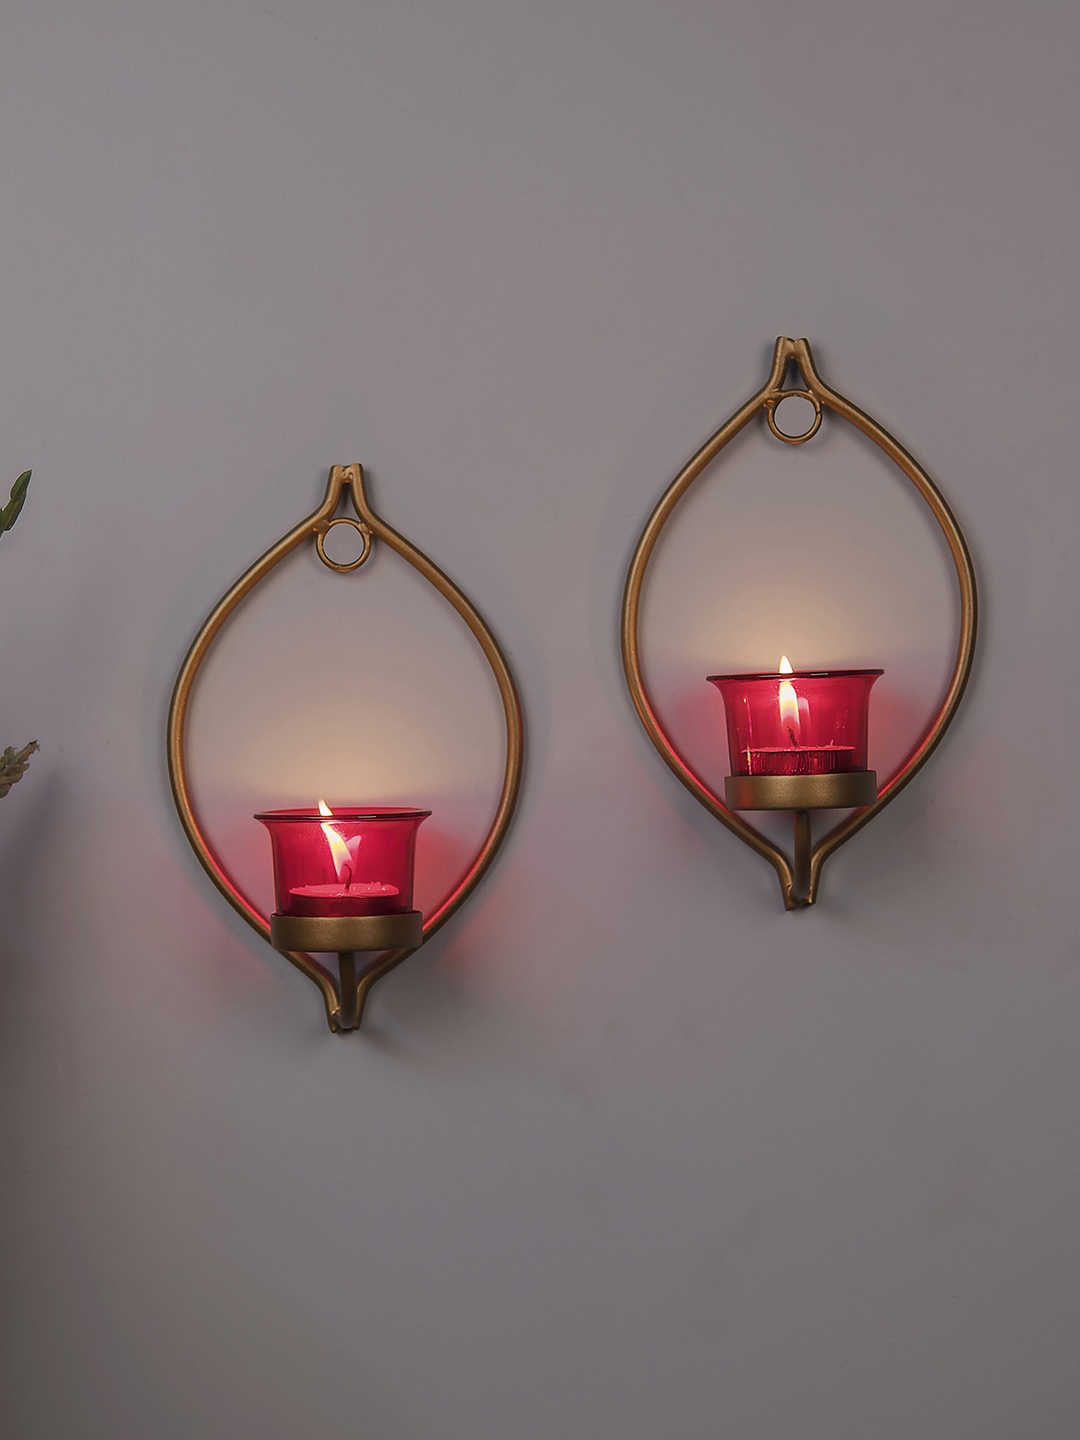 

Homesake Set of 2 Gold-Toned & Red Candle Holders With Candles